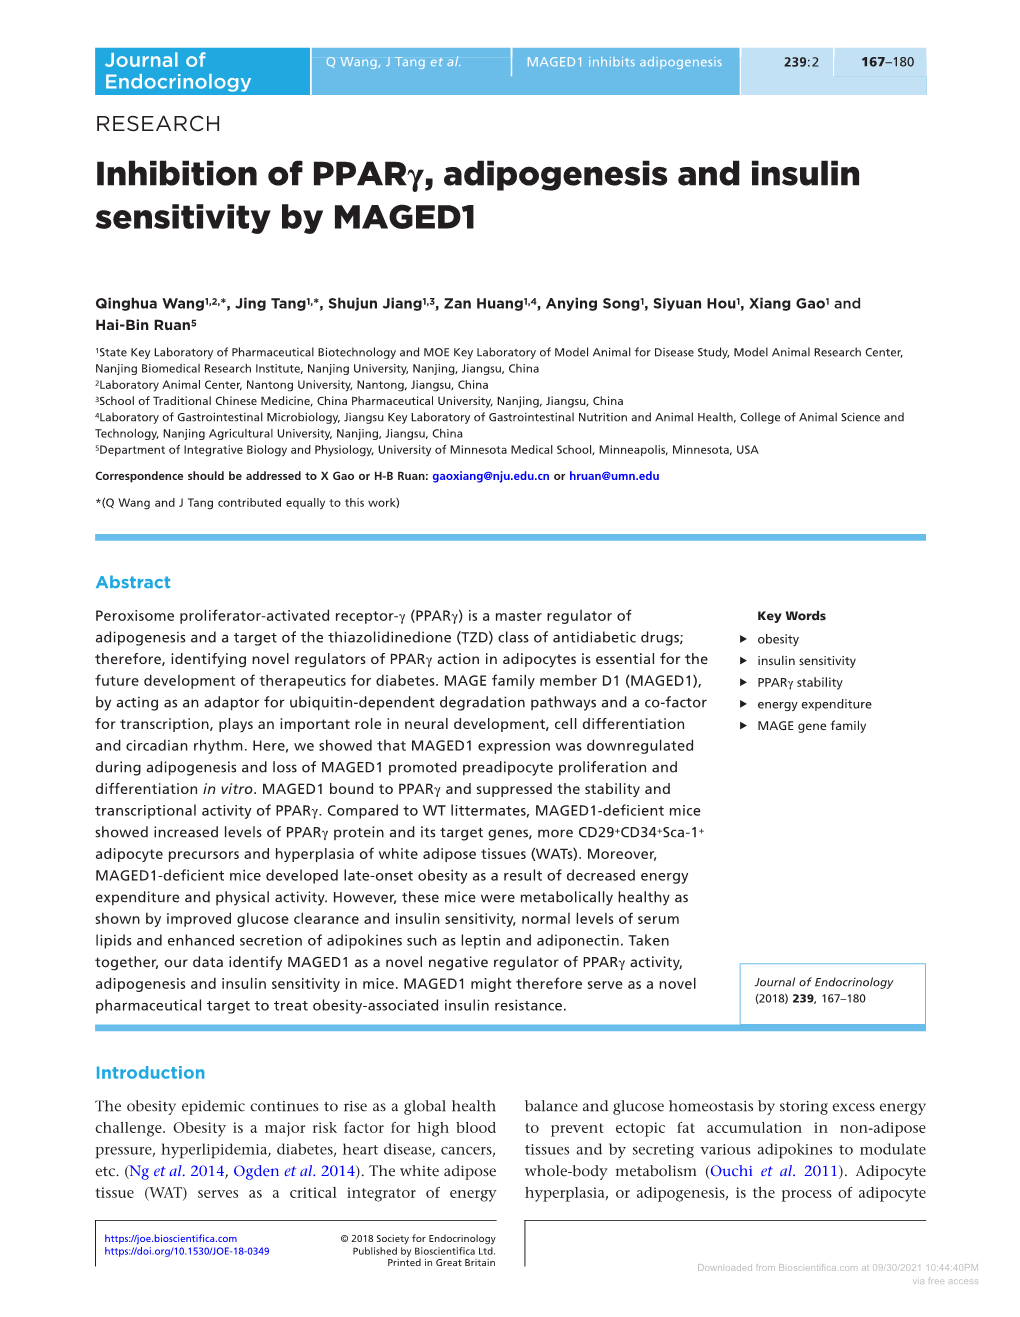 Inhibition of Pparγ, Adipogenesis and Insulin Sensitivity by MAGED1